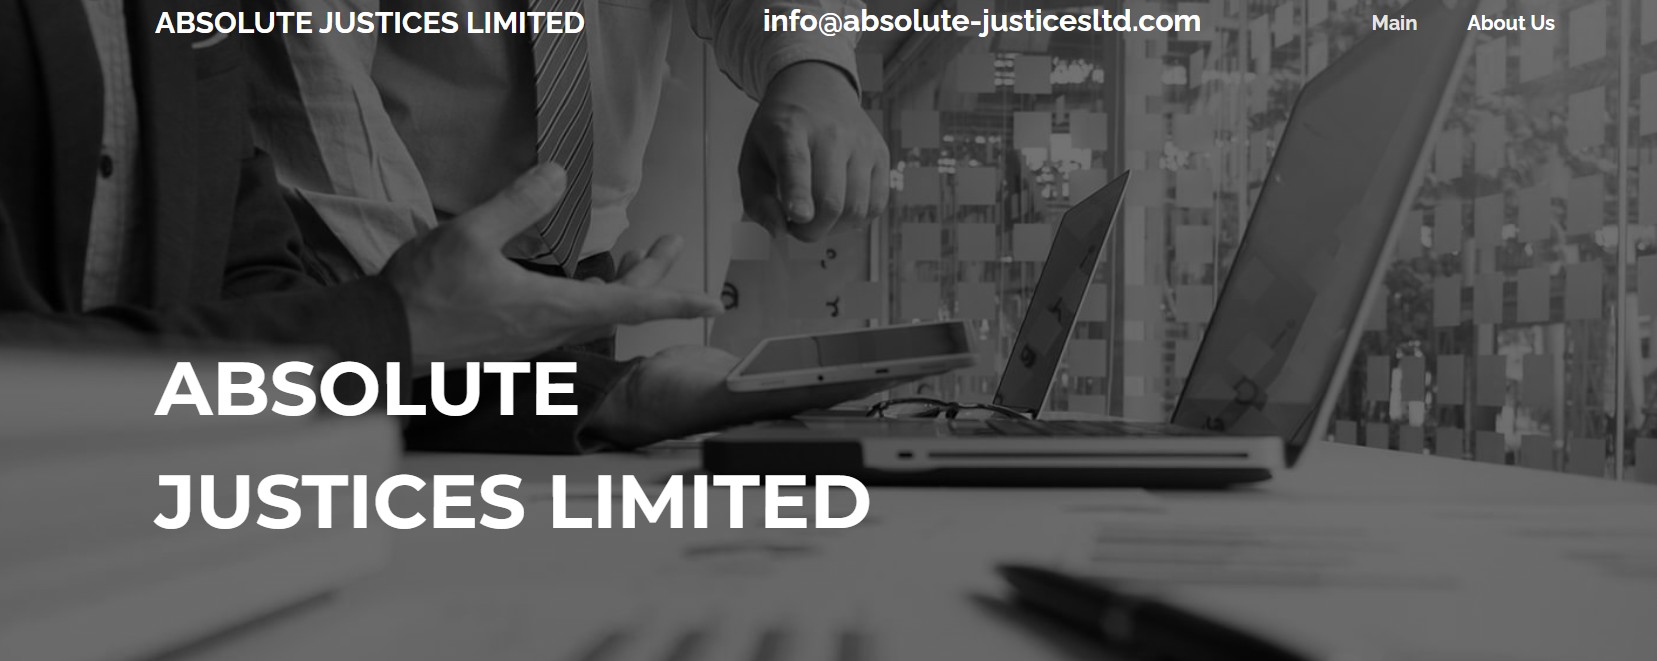 Absolute Justices Limited обзор сайта